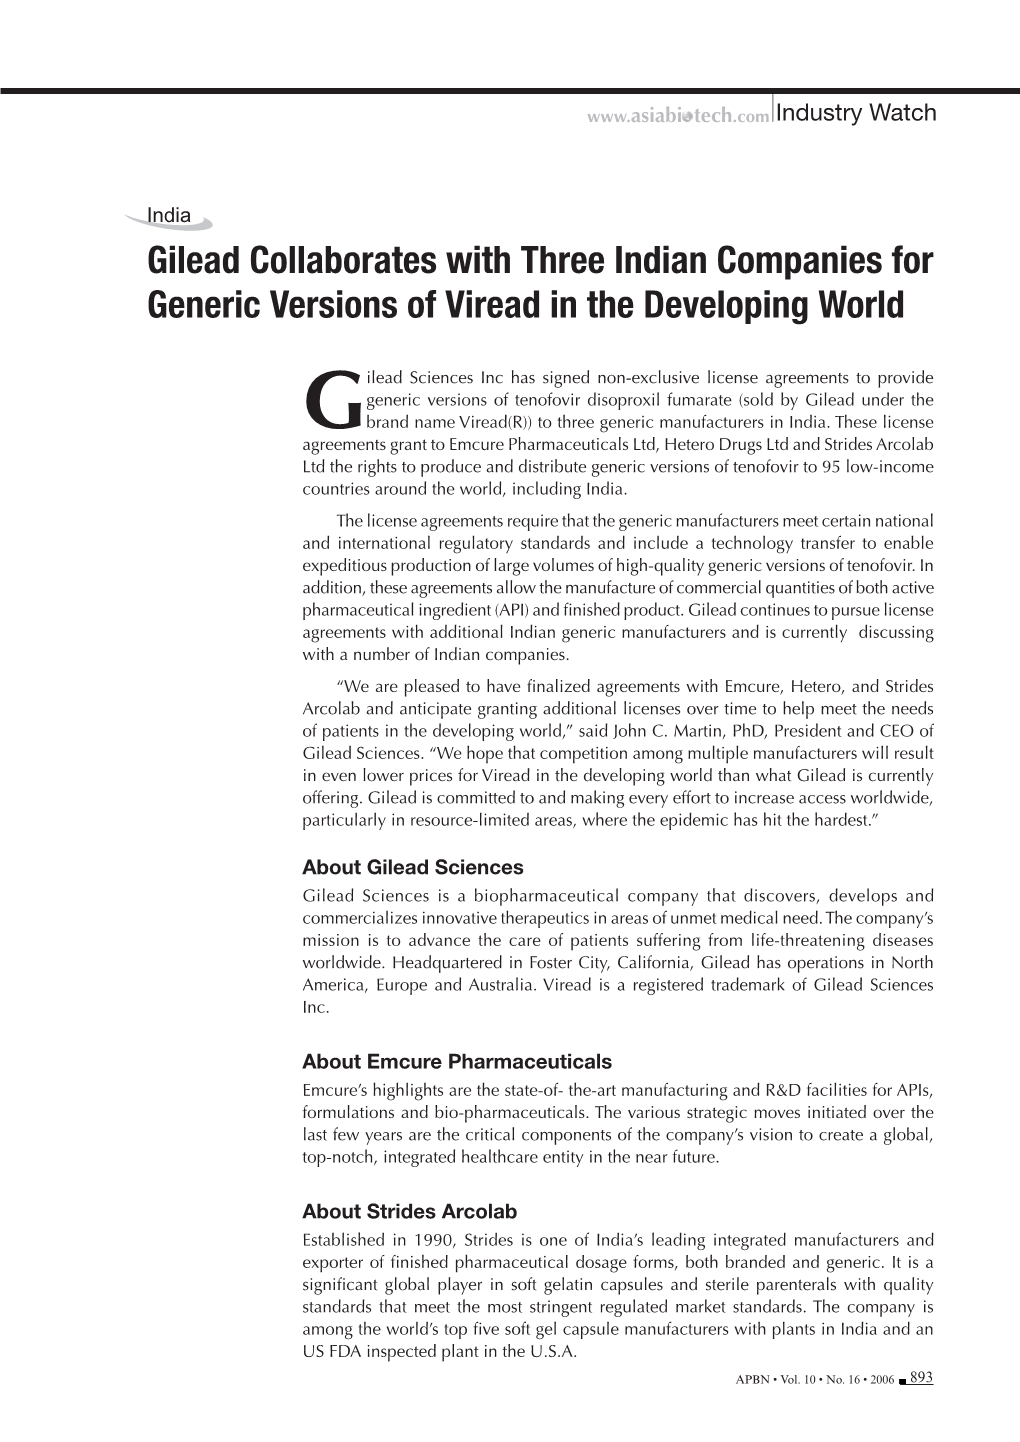 Gilead Collaborates with Three Indian Companies for Generic Versions of Viread in the Developing World